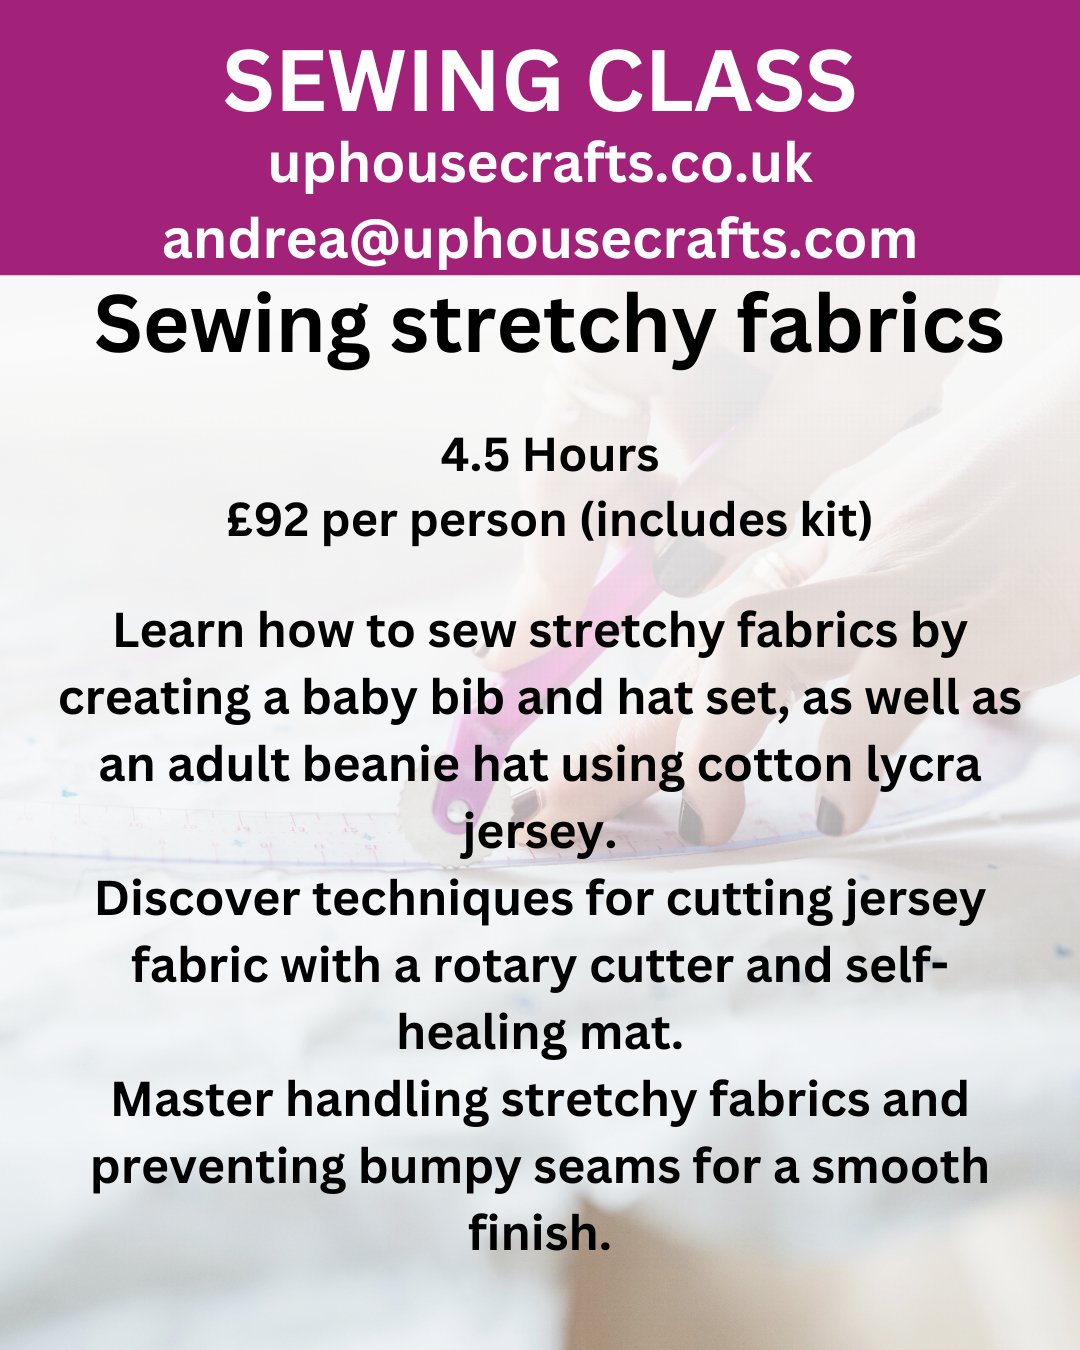 Sewing Classes in Shetland @ Uphouse Crafts - Uphouse Crafts